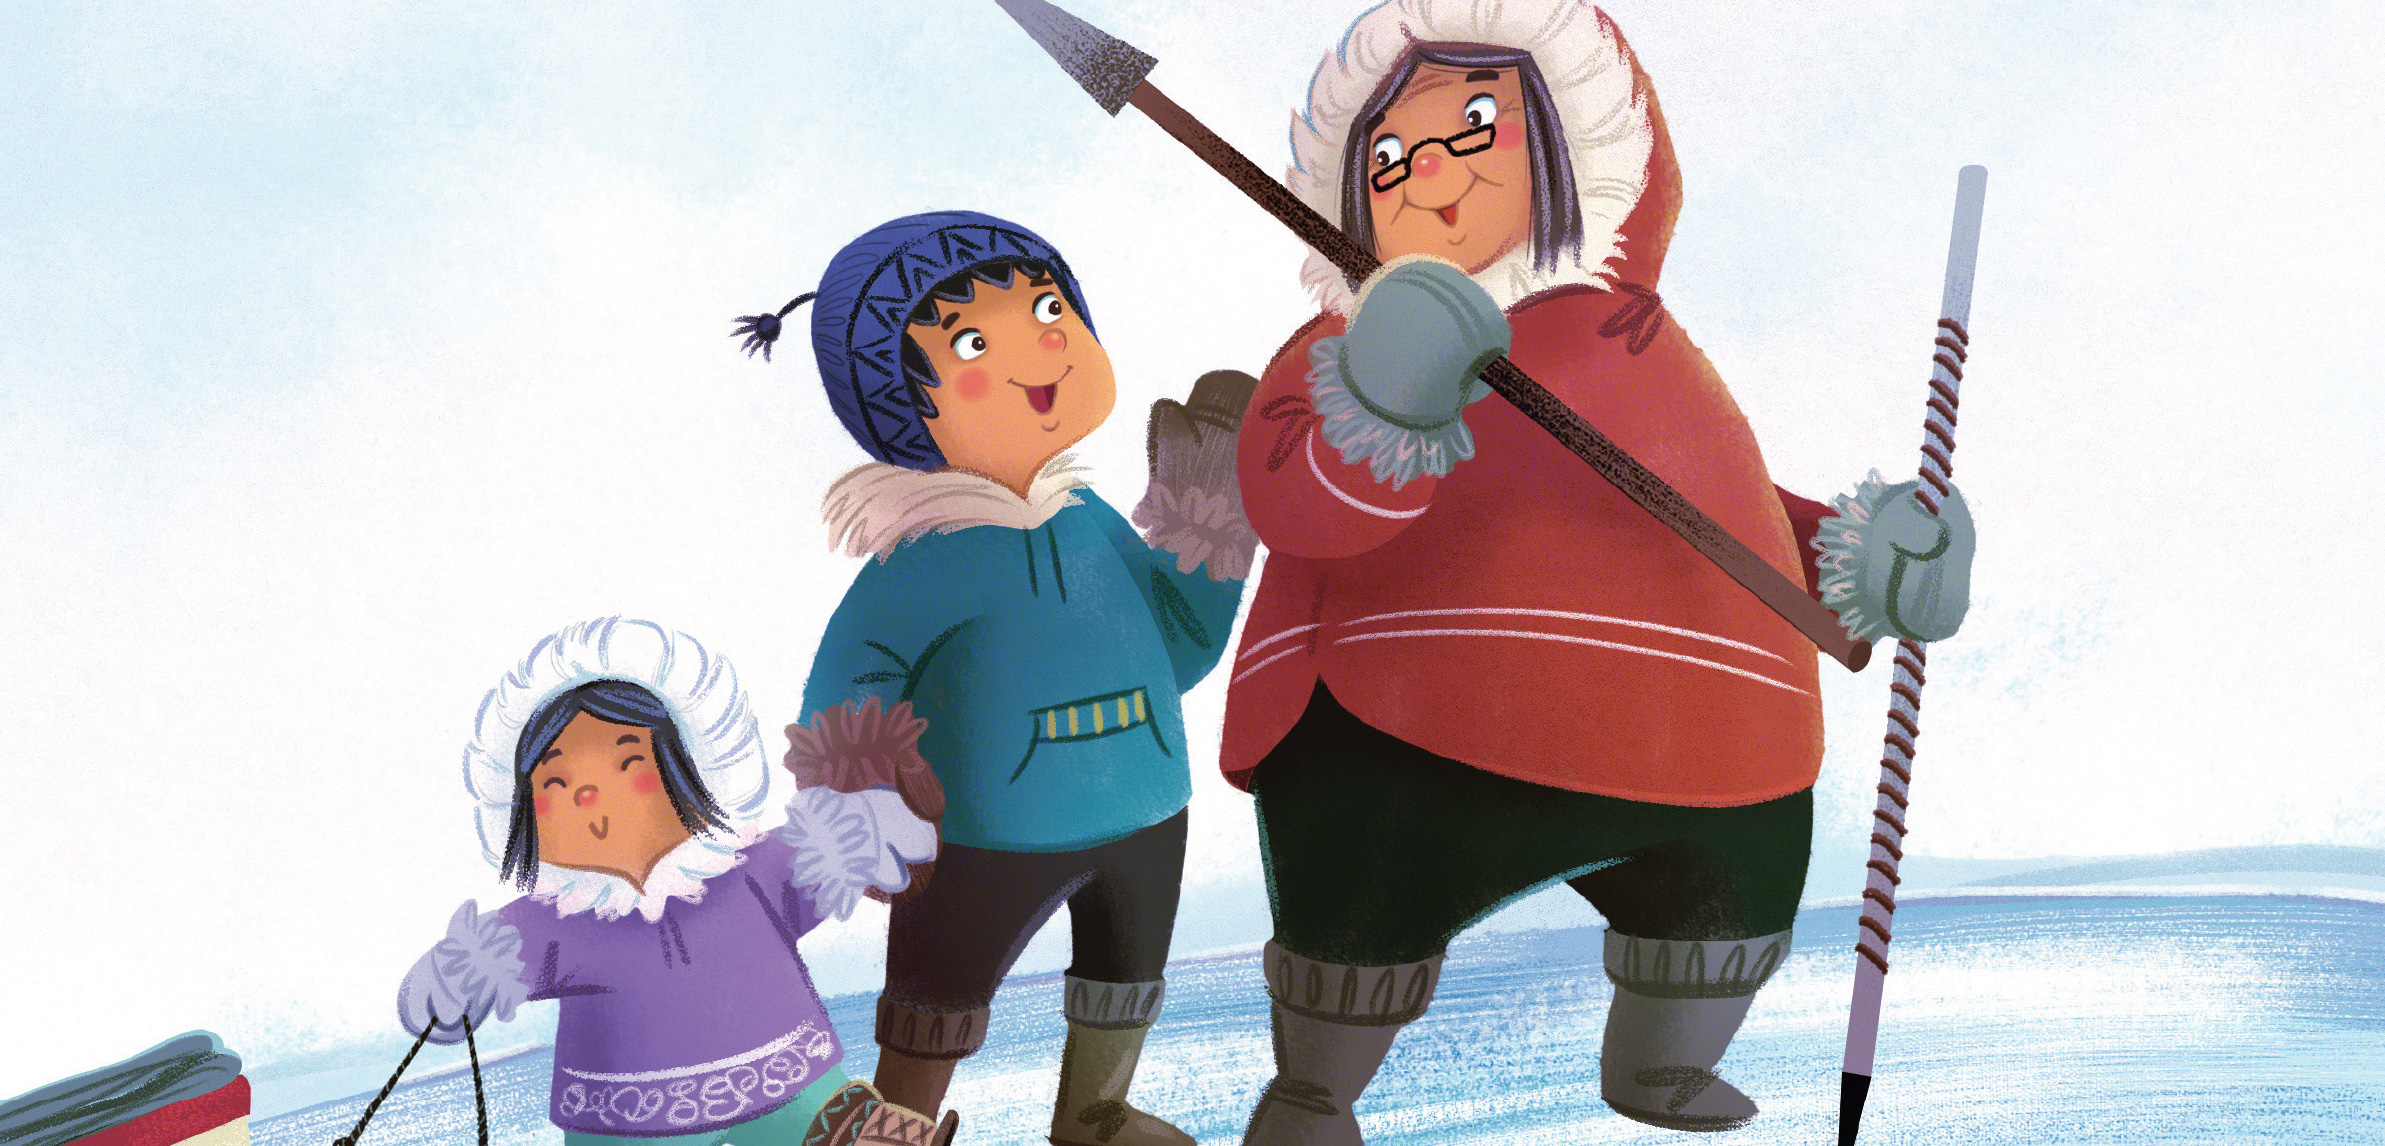 A detail of the cover illustration from Fishing with Grandma by Susan Avingaq and Maren Vsetula. Image courtesy of Inhabit Media